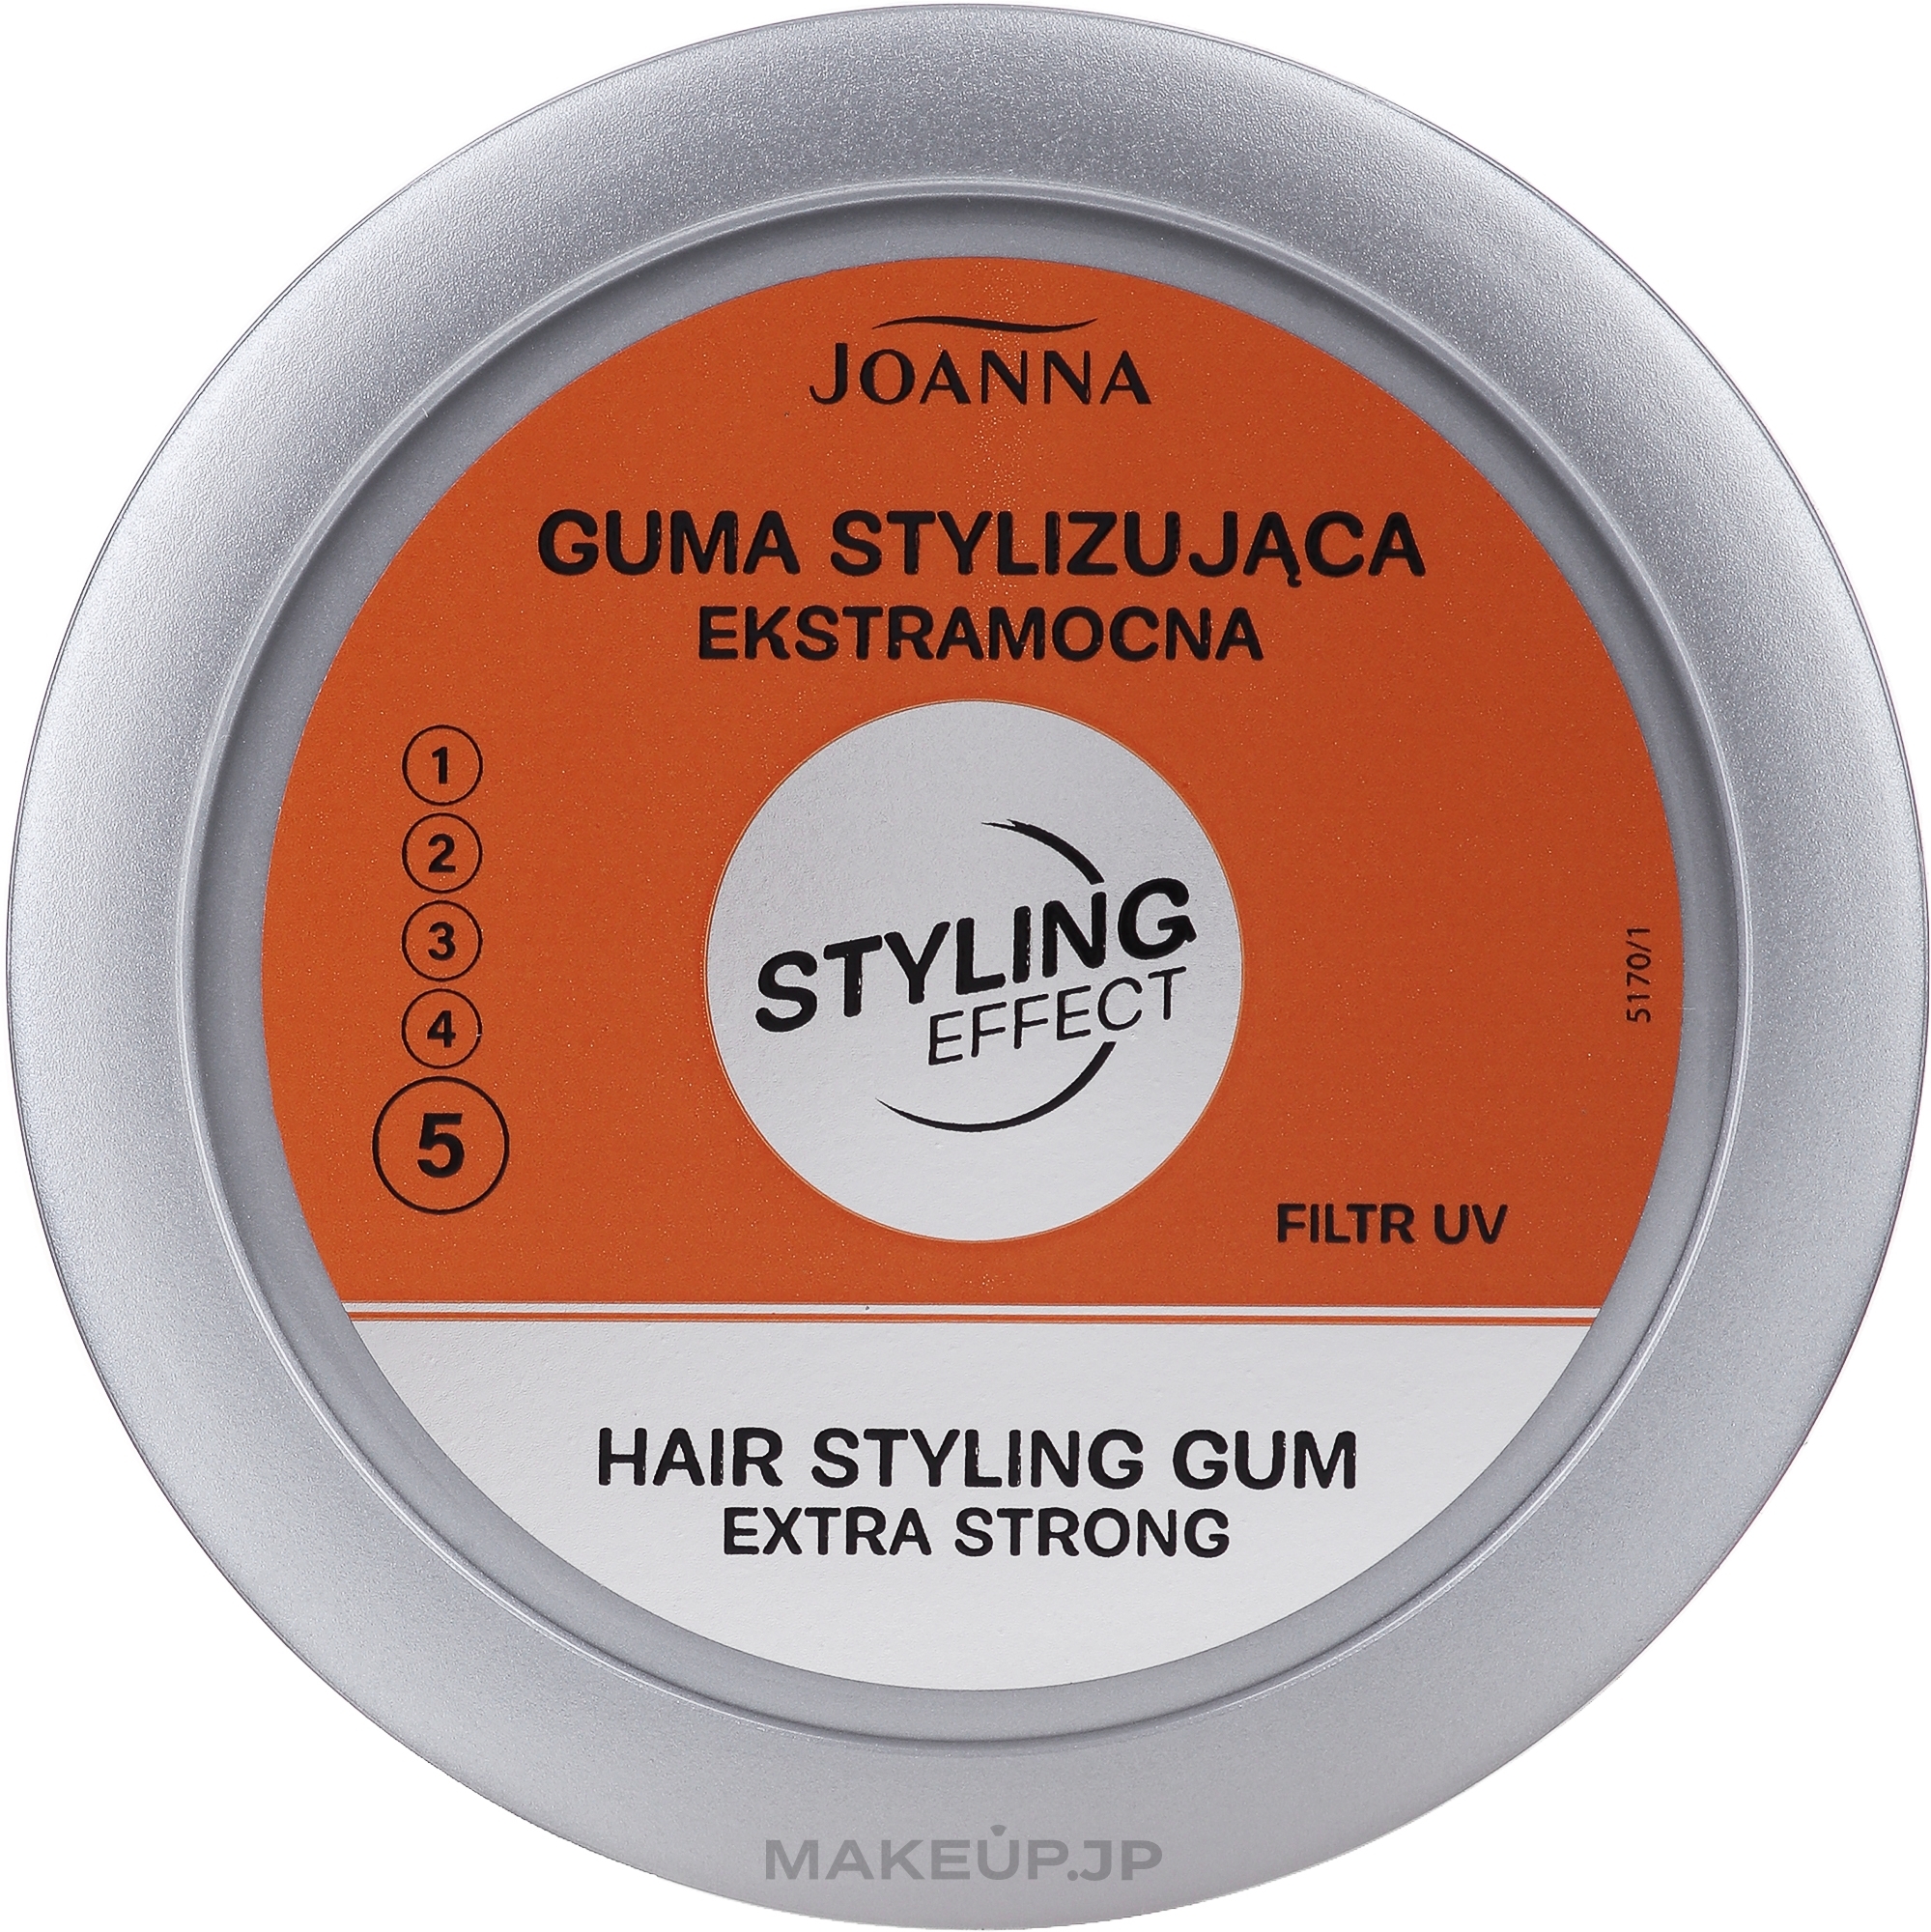 Creative Styling Hair Gum - Joanna Styling Effect Hair Styling Gum Extra Strong — photo 100 g